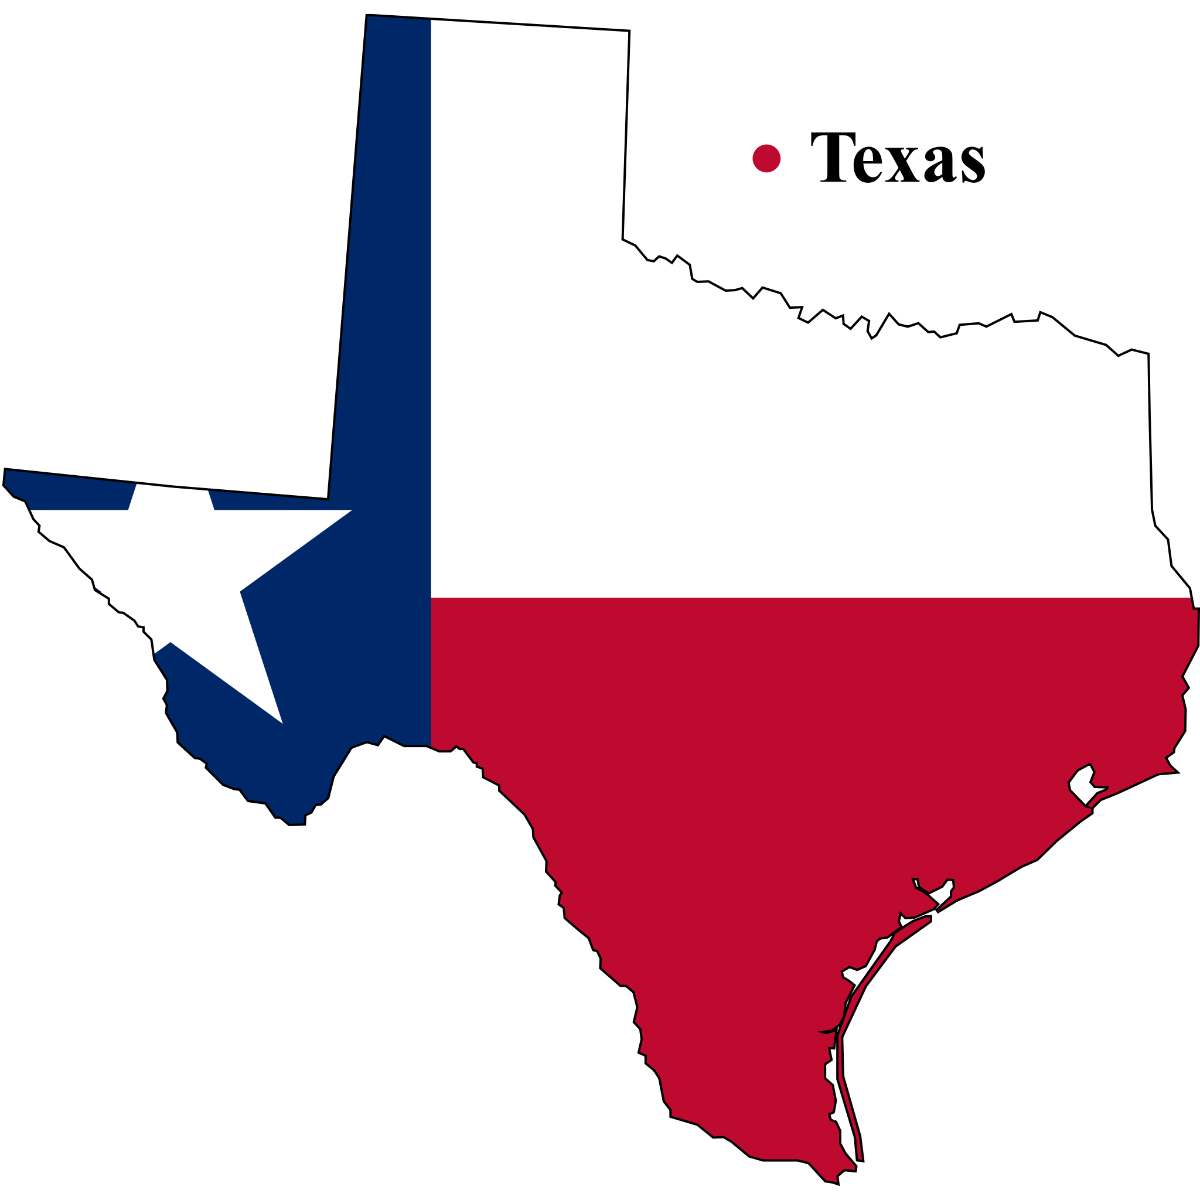 Texas State map cutout with Texas flag superimposed